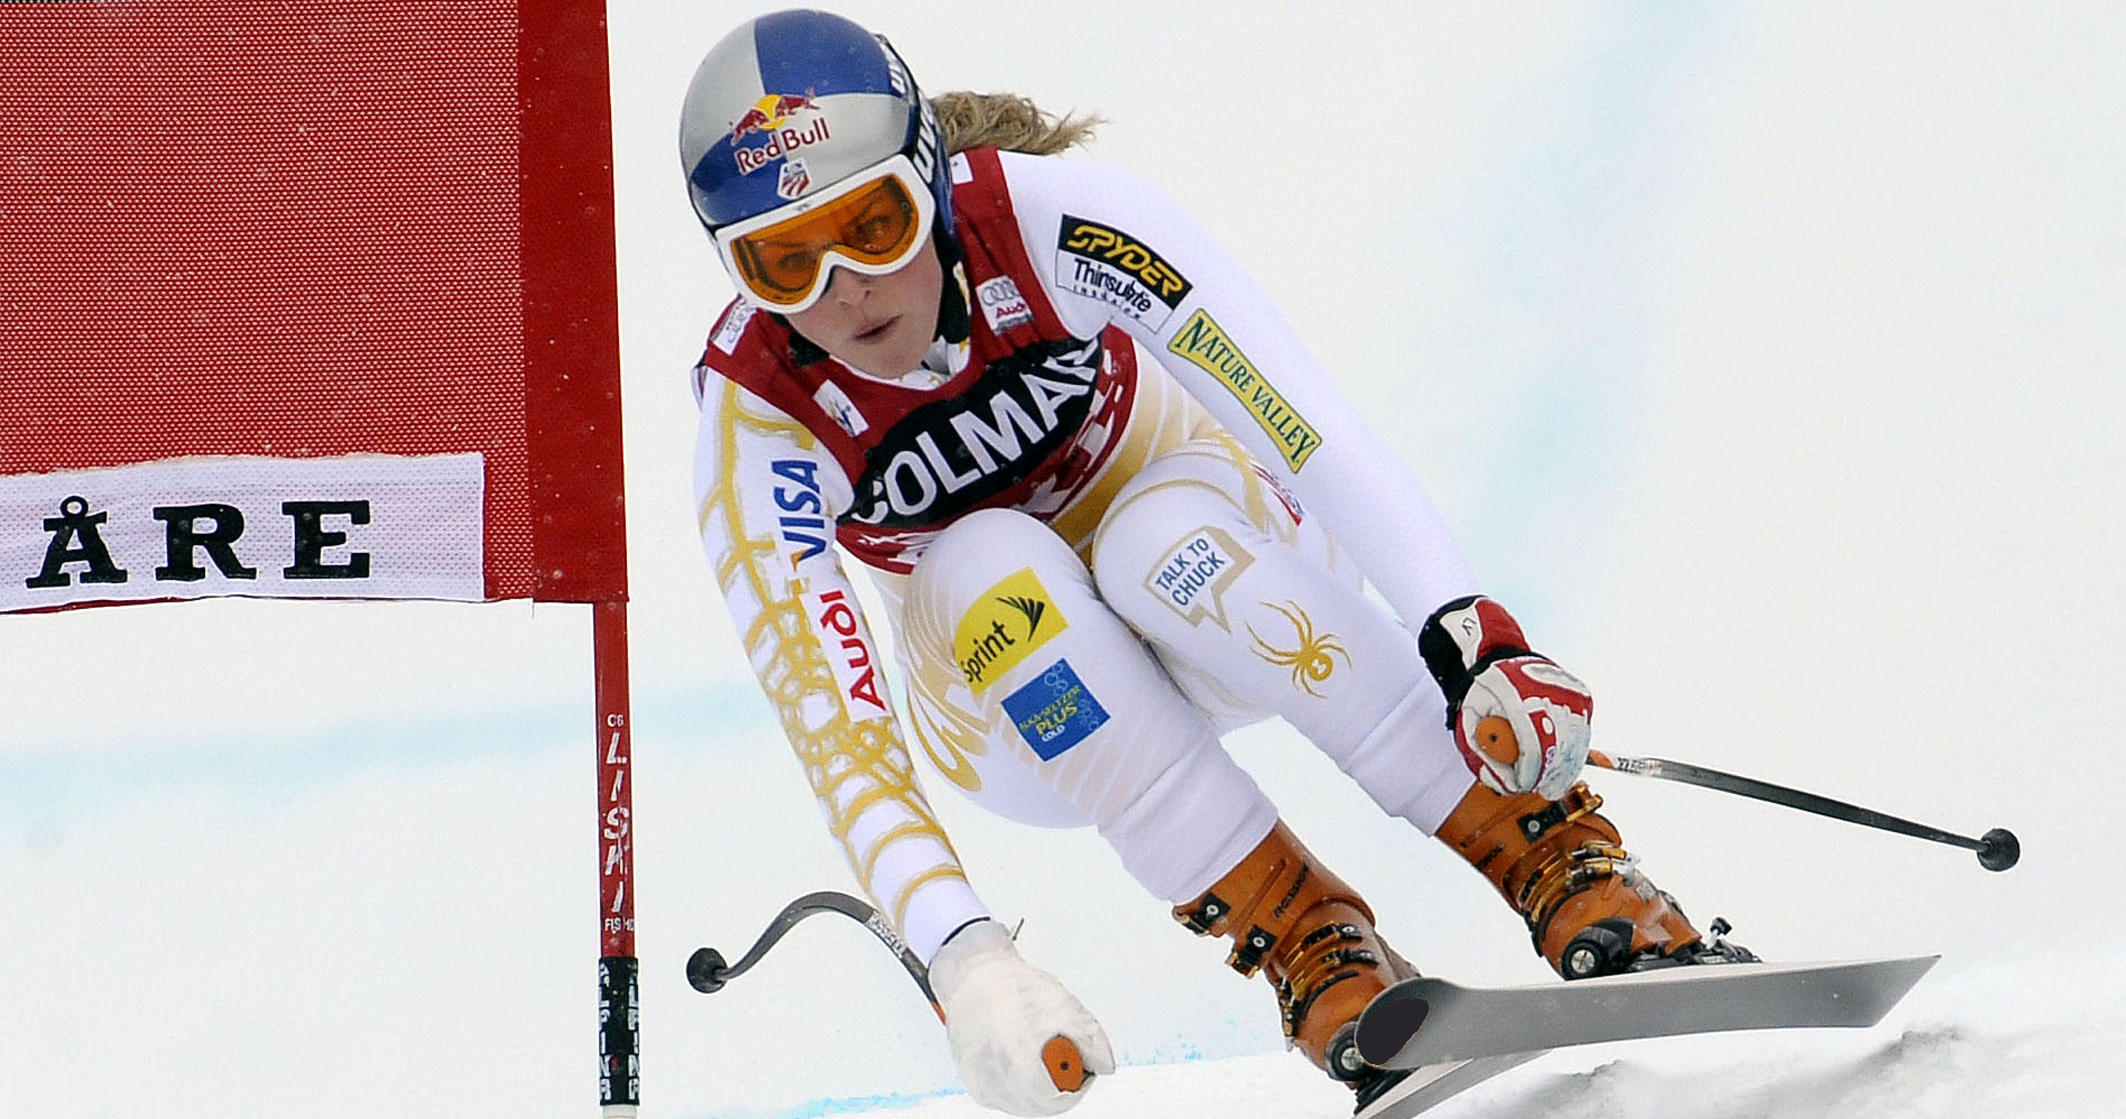 Lindsey Vonn won the World Cup downhill title in Are, Sweden in 2009. Currently second in the downhill standings, she is gunning for her ninth World Cup downhill title Wednesday in Are.